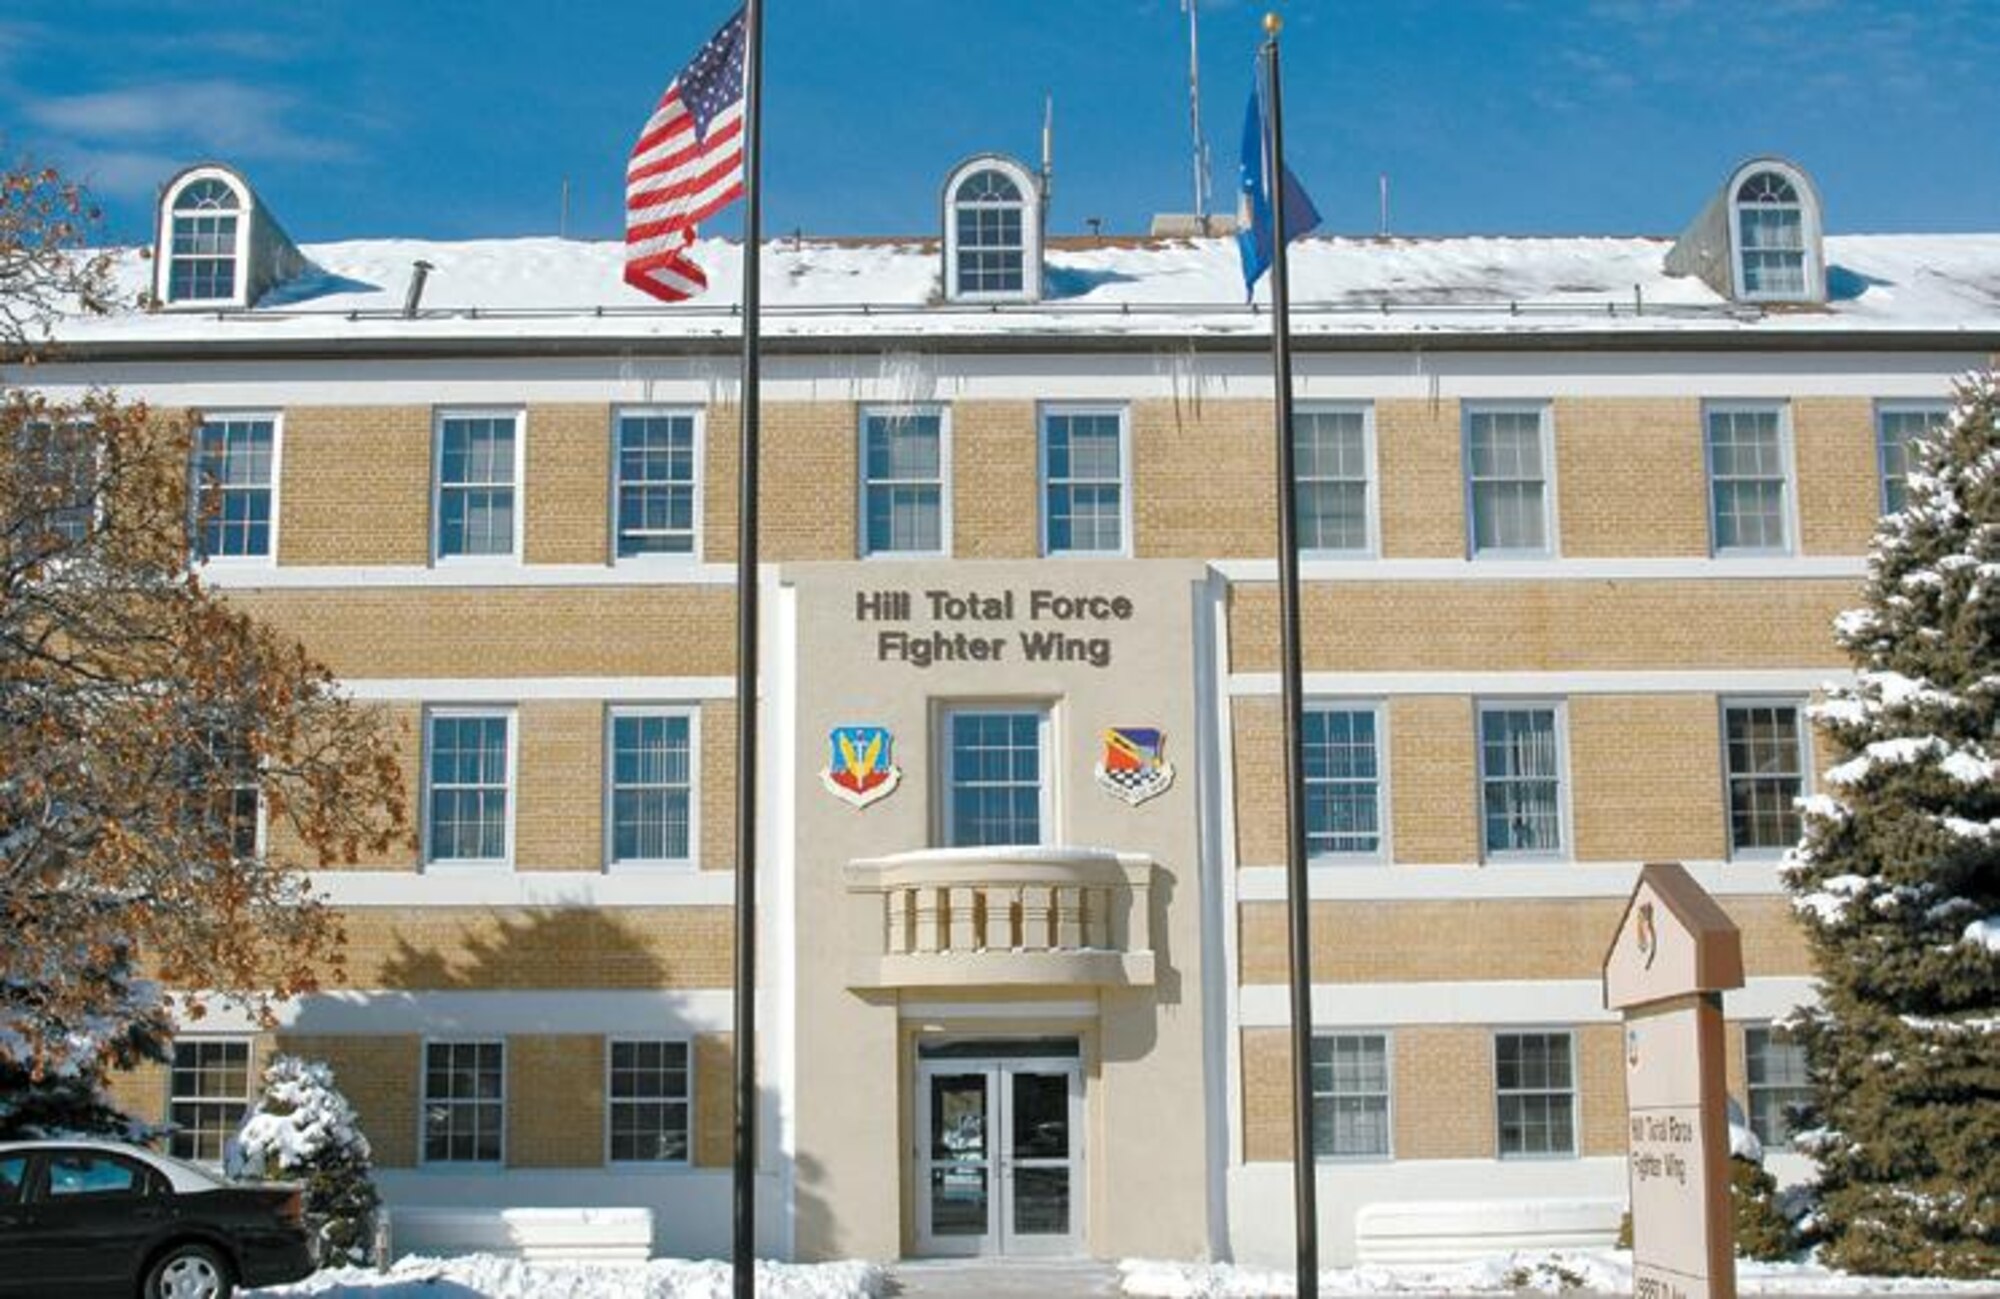 The newly renovated headquarters building?s exterior has been changed to show it will become home for both the 388th and 419th Fighter Wings of the Hill Total Force Fighter Wing.